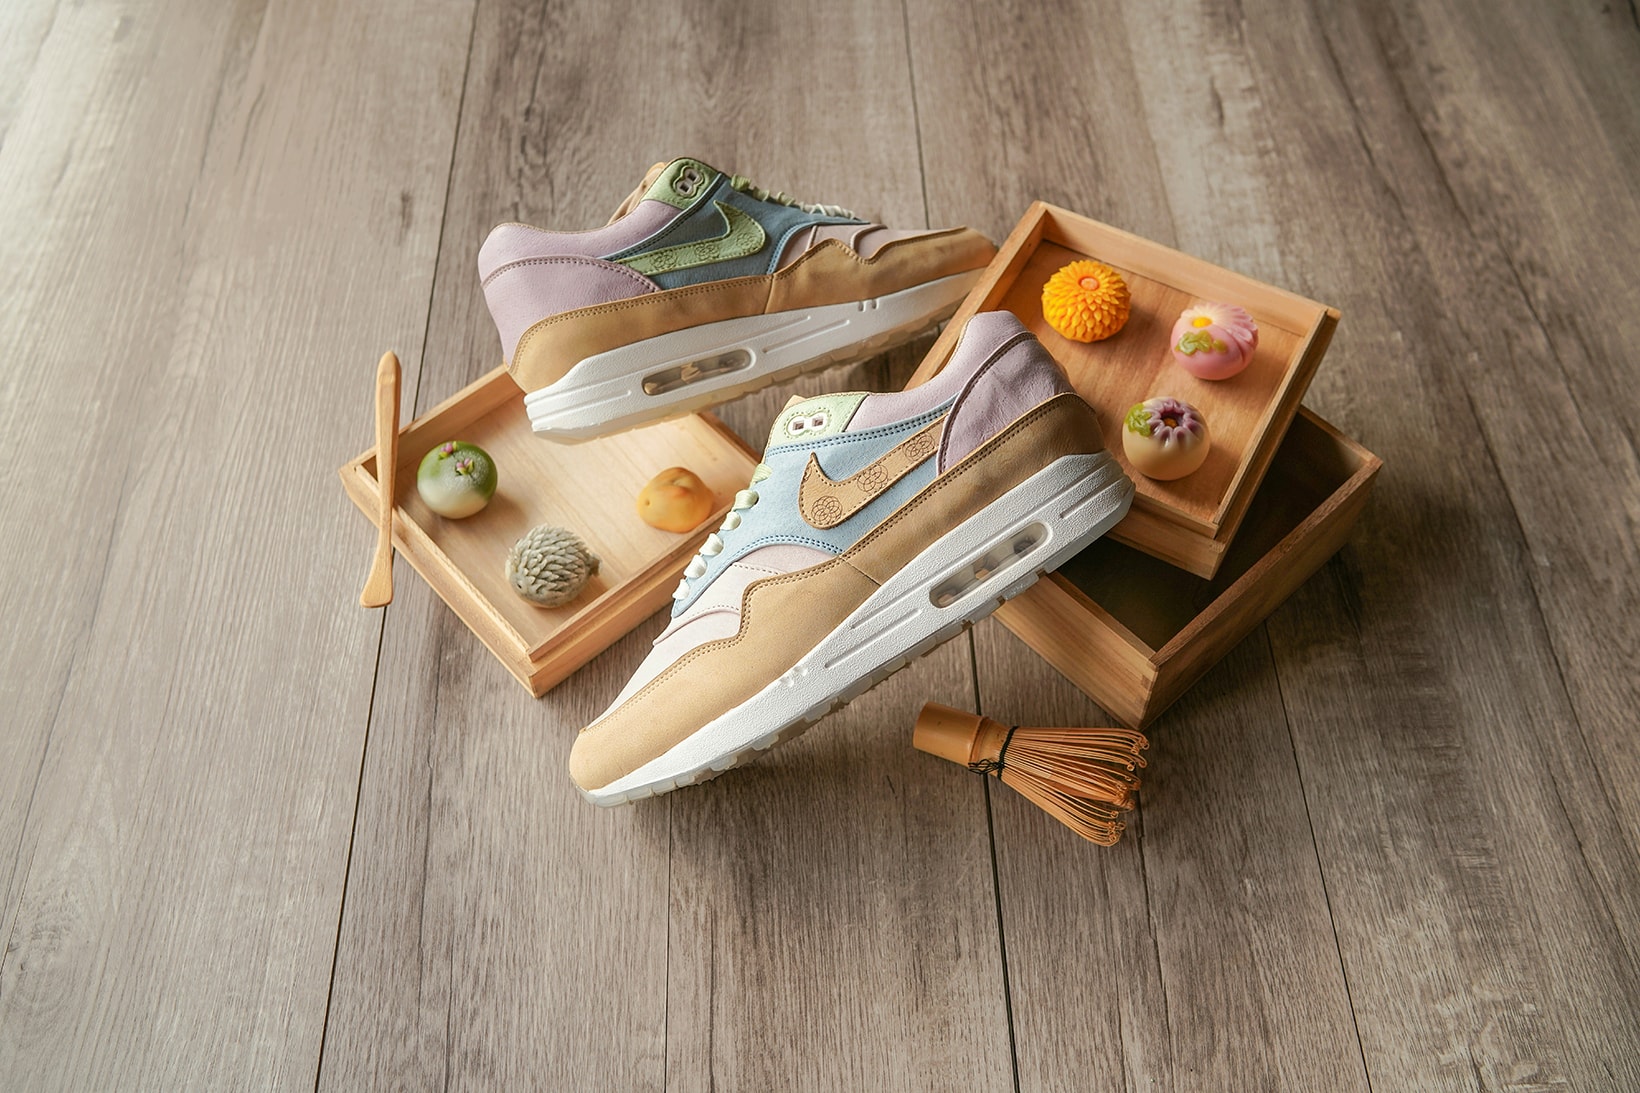 nike air max 1 wagashi traditional japanese sweets food ryustyler chase shiel collaboration custom sneakers pastel blue purple green brown shoes sneakerhead footwear